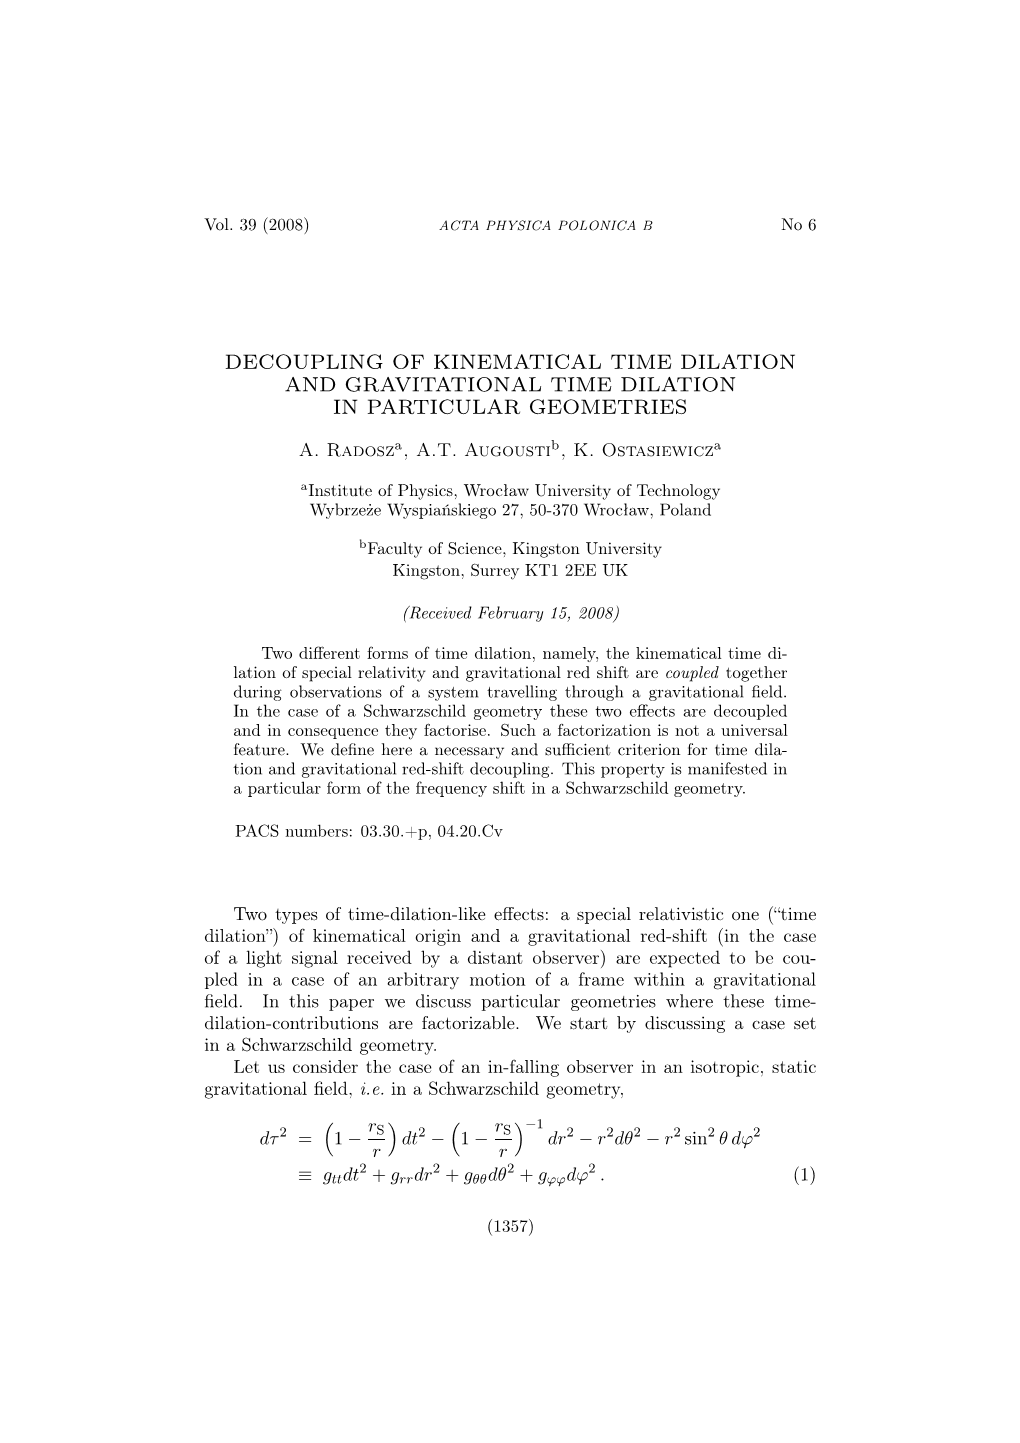 Decoupling of Kinematical Time Dilation and Gravitational Time Dilation in Particular Geometries